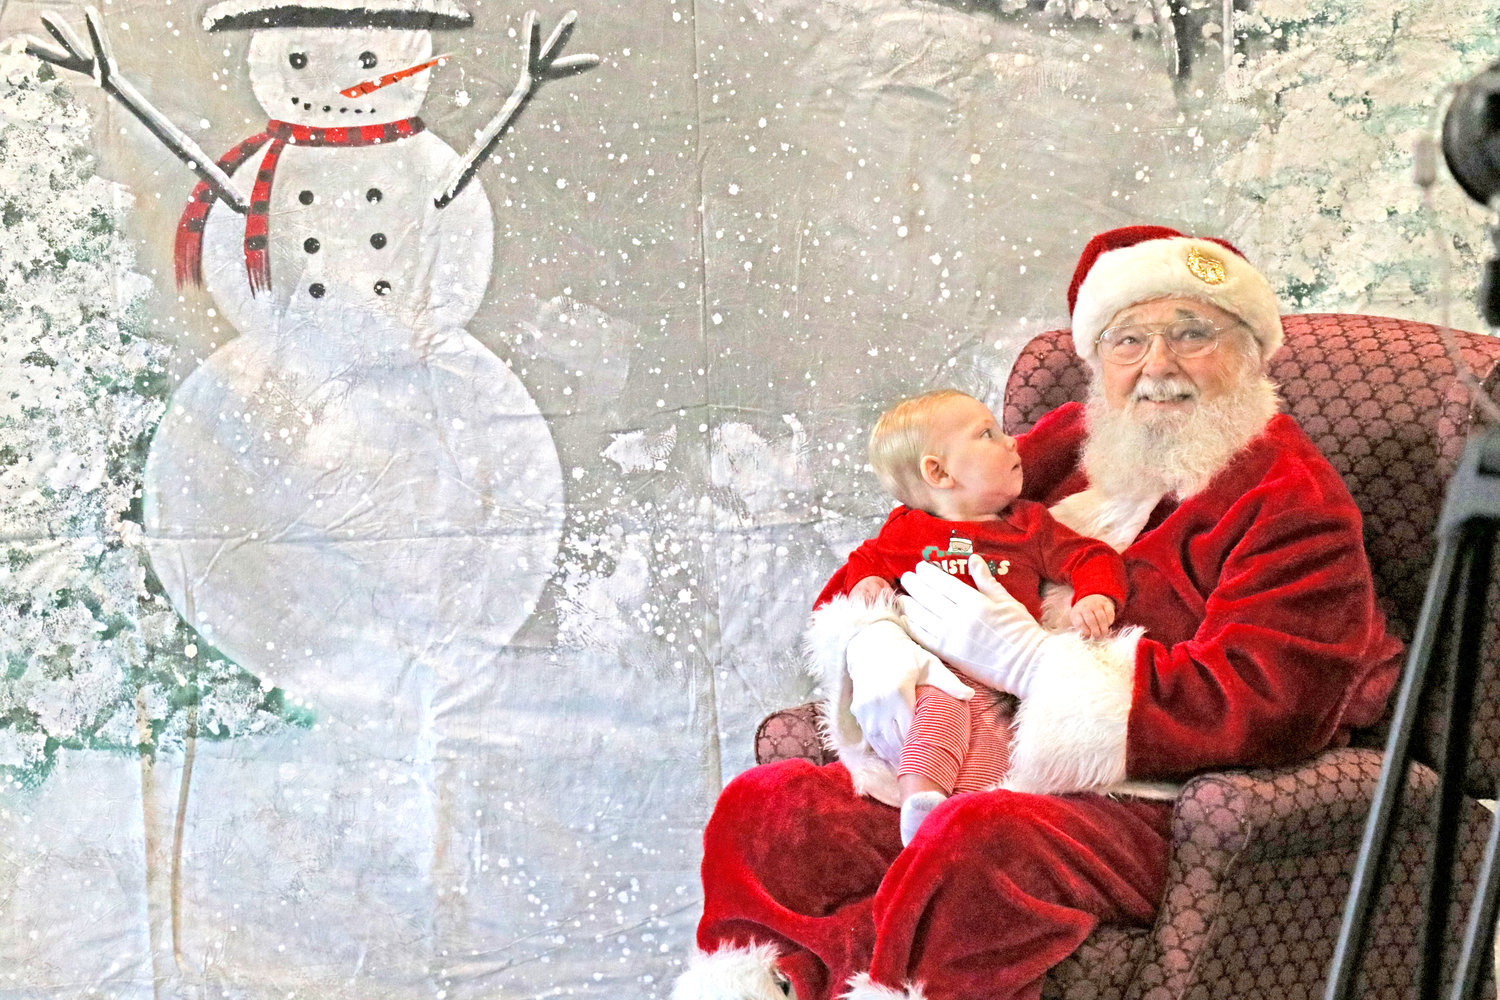 Baby Redlinger, 8 months, was very intrigued by Santa Claus during Christmas in Kalona.